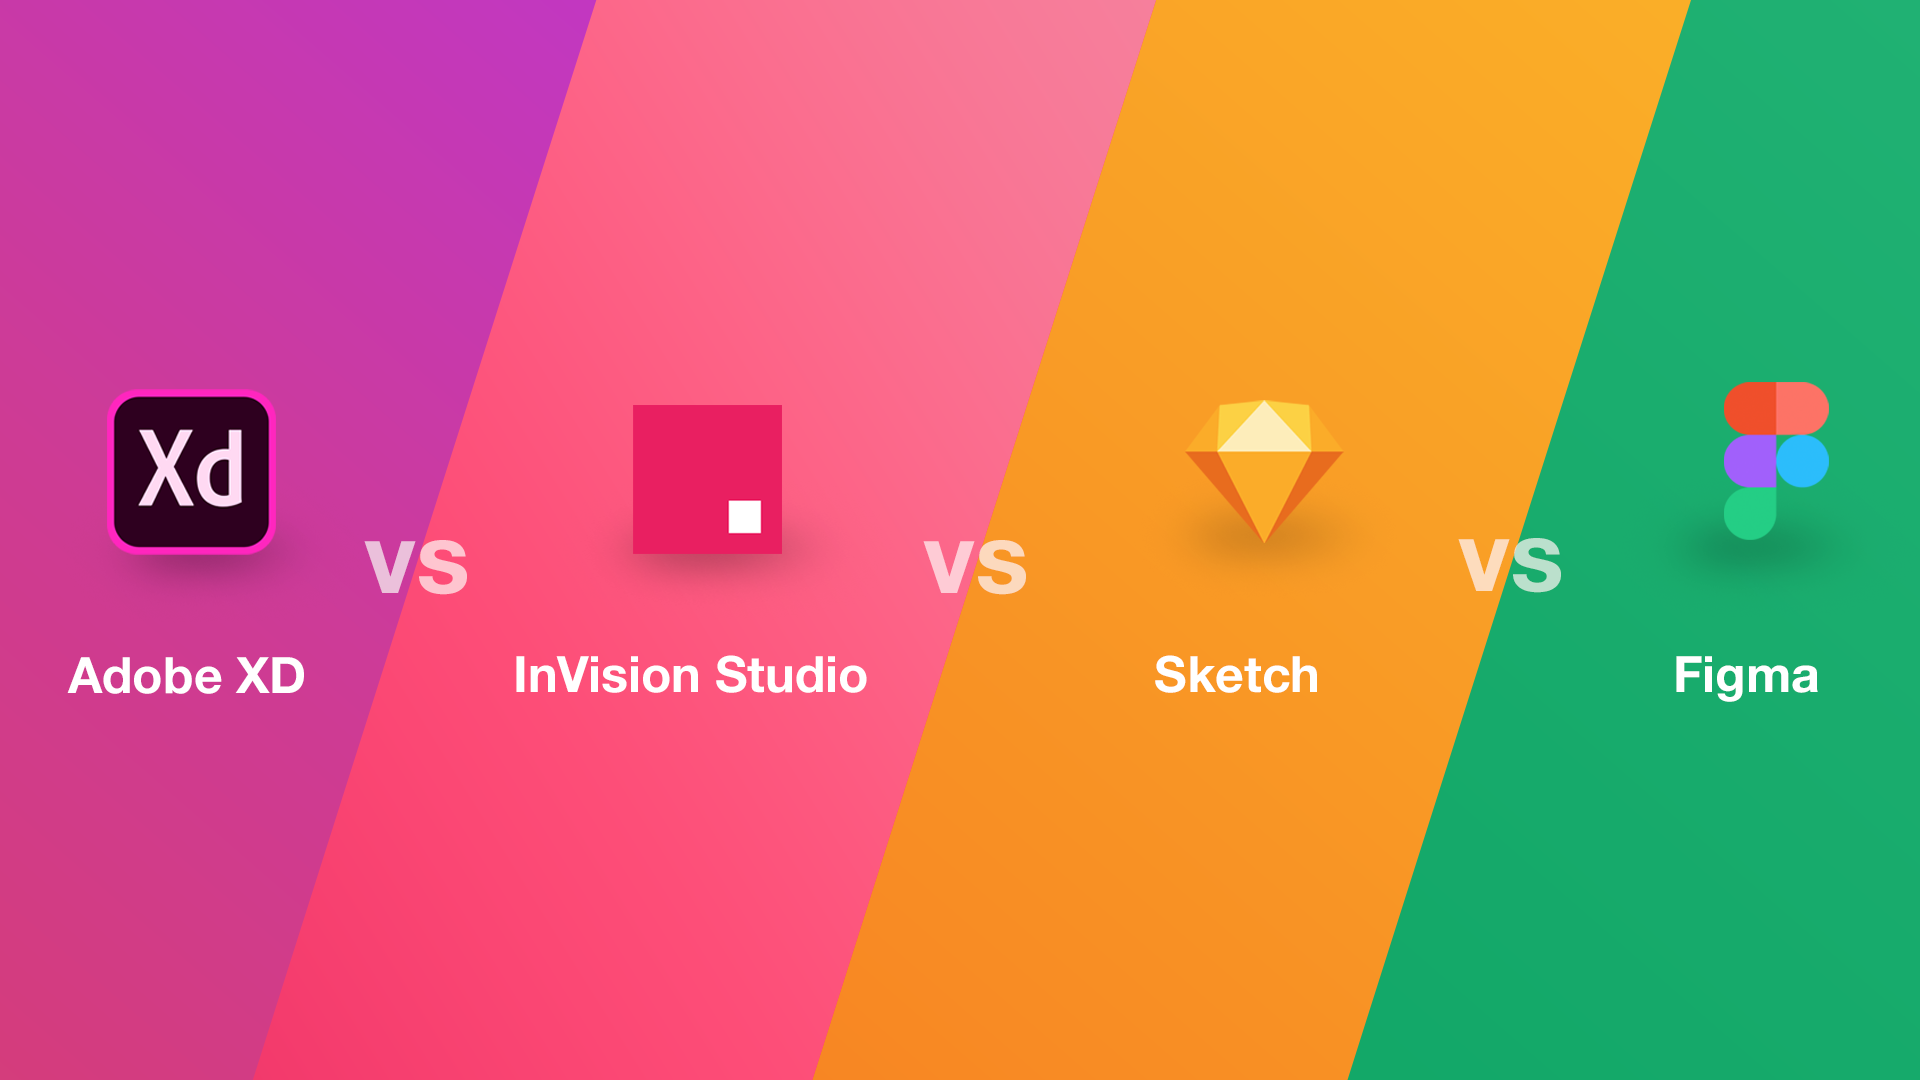 InVision takes on Sketch and Adobe XD with its new Studio design app